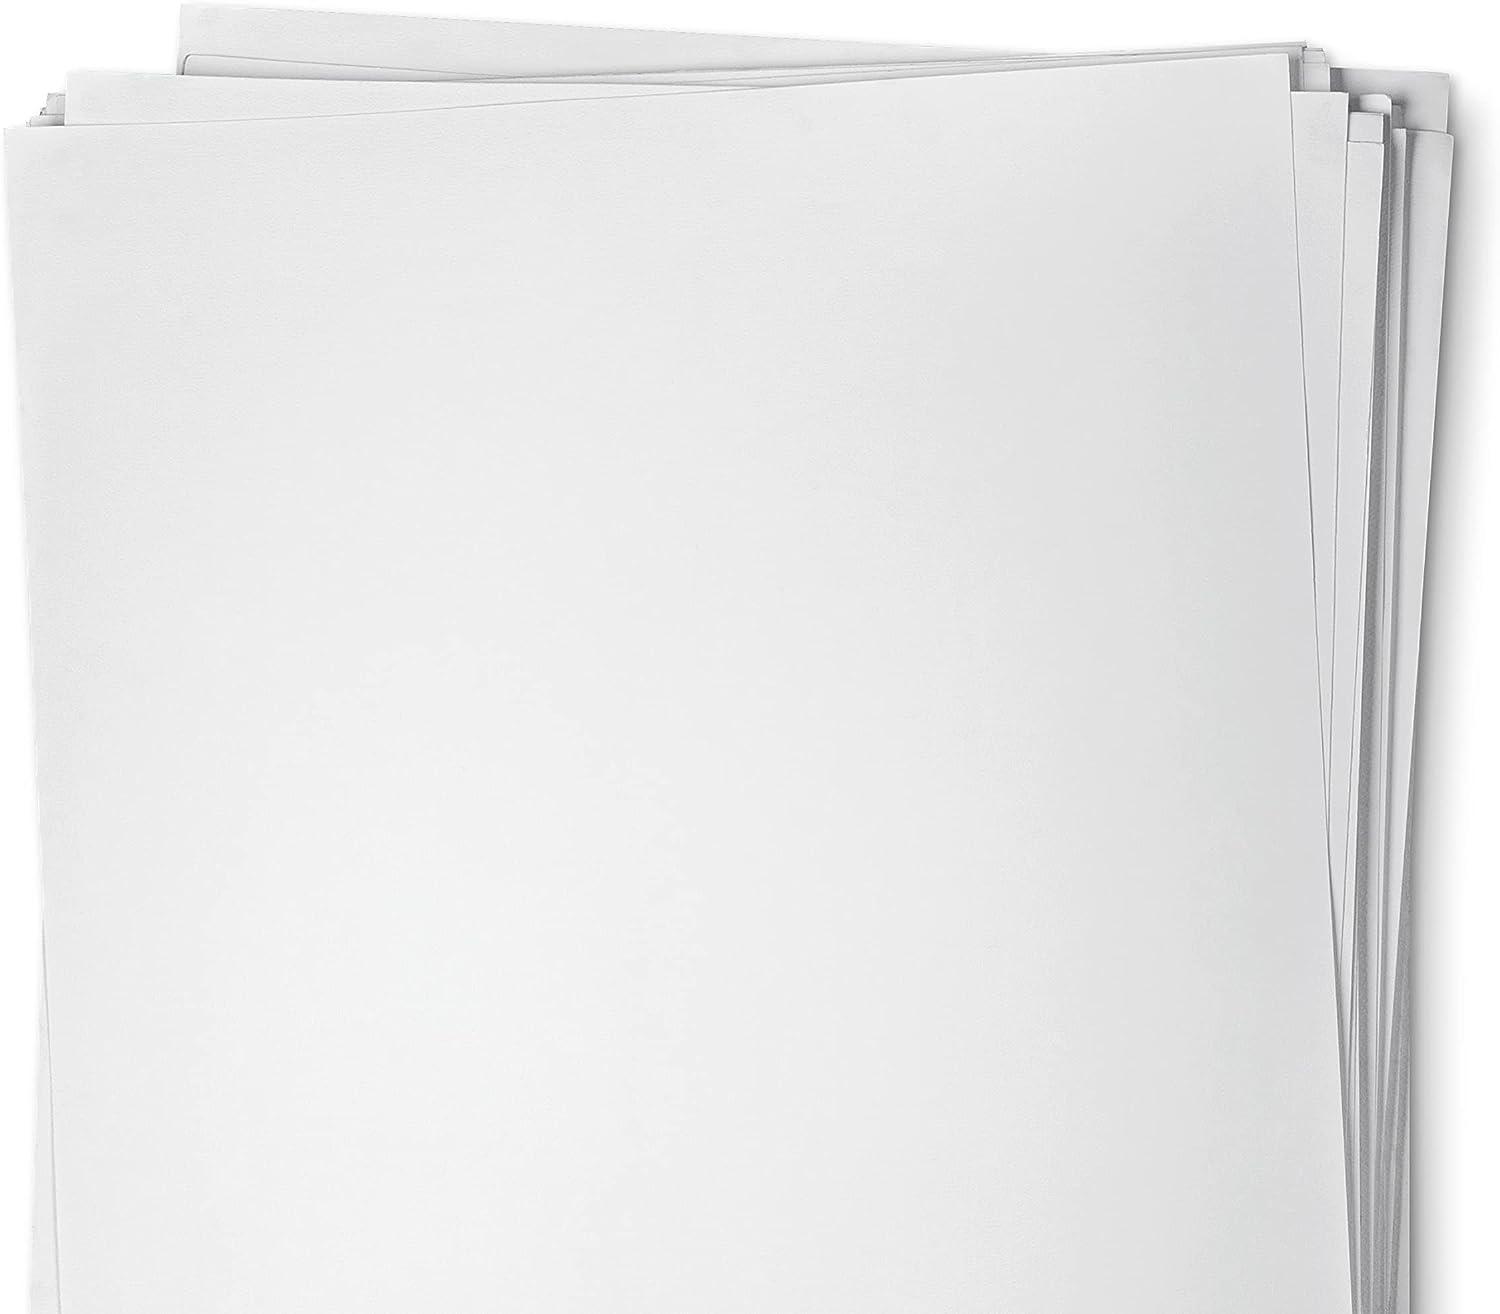 TYH Supplies 50 Pack Newsprint Drawing Paper Printer Friendly Blank 32 lb,  Rough, 8.5 x 11 Inches 8.5 x 11 Inch - 50 Pack